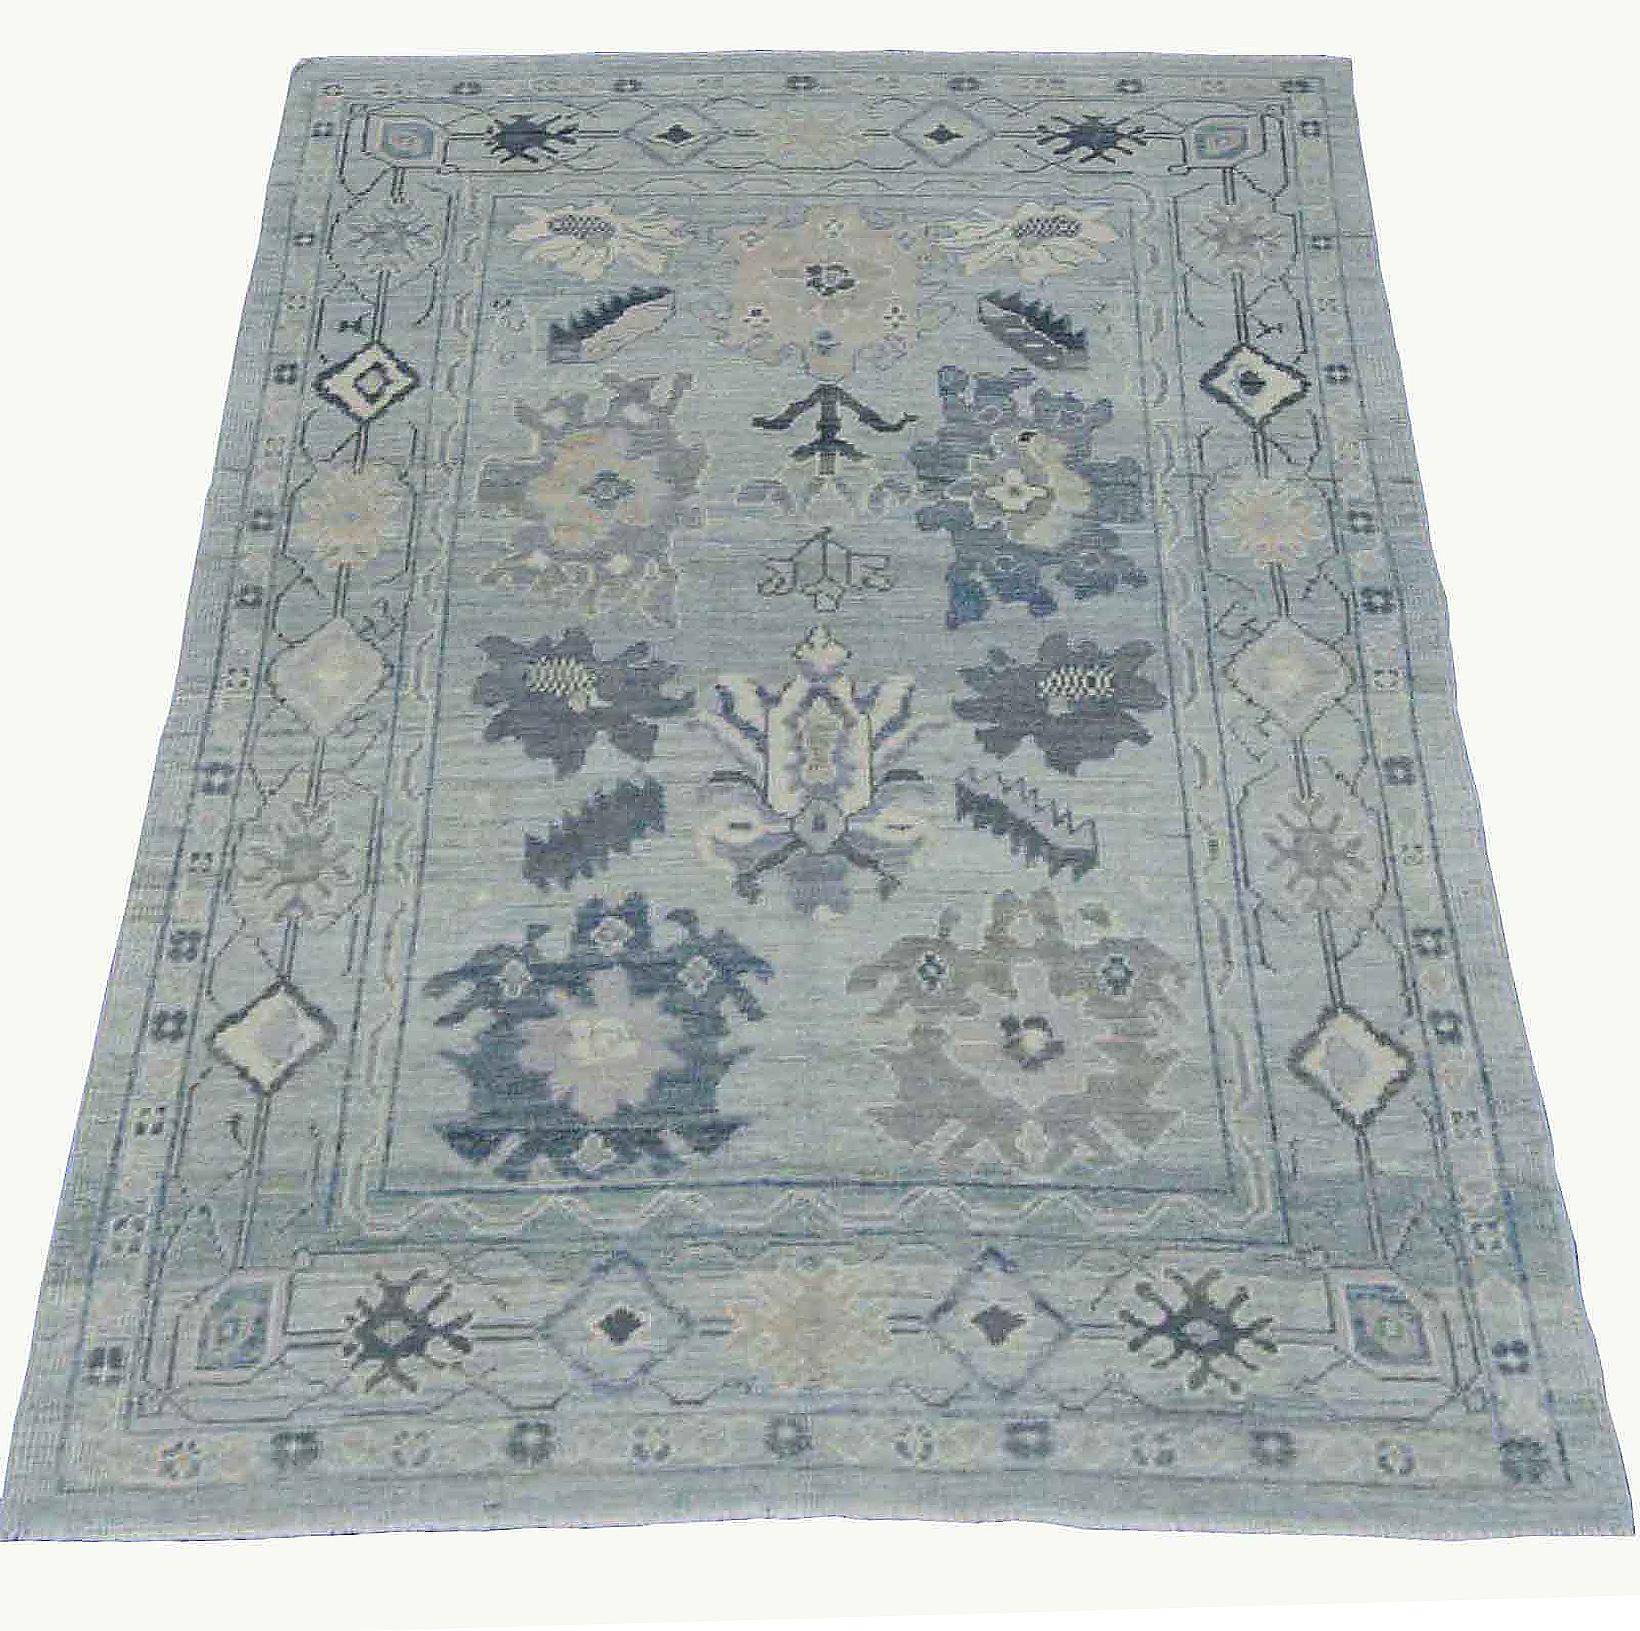 Turkish Contemporary Oushak Rug with Floral Patterns in White and Gray on Blue Field